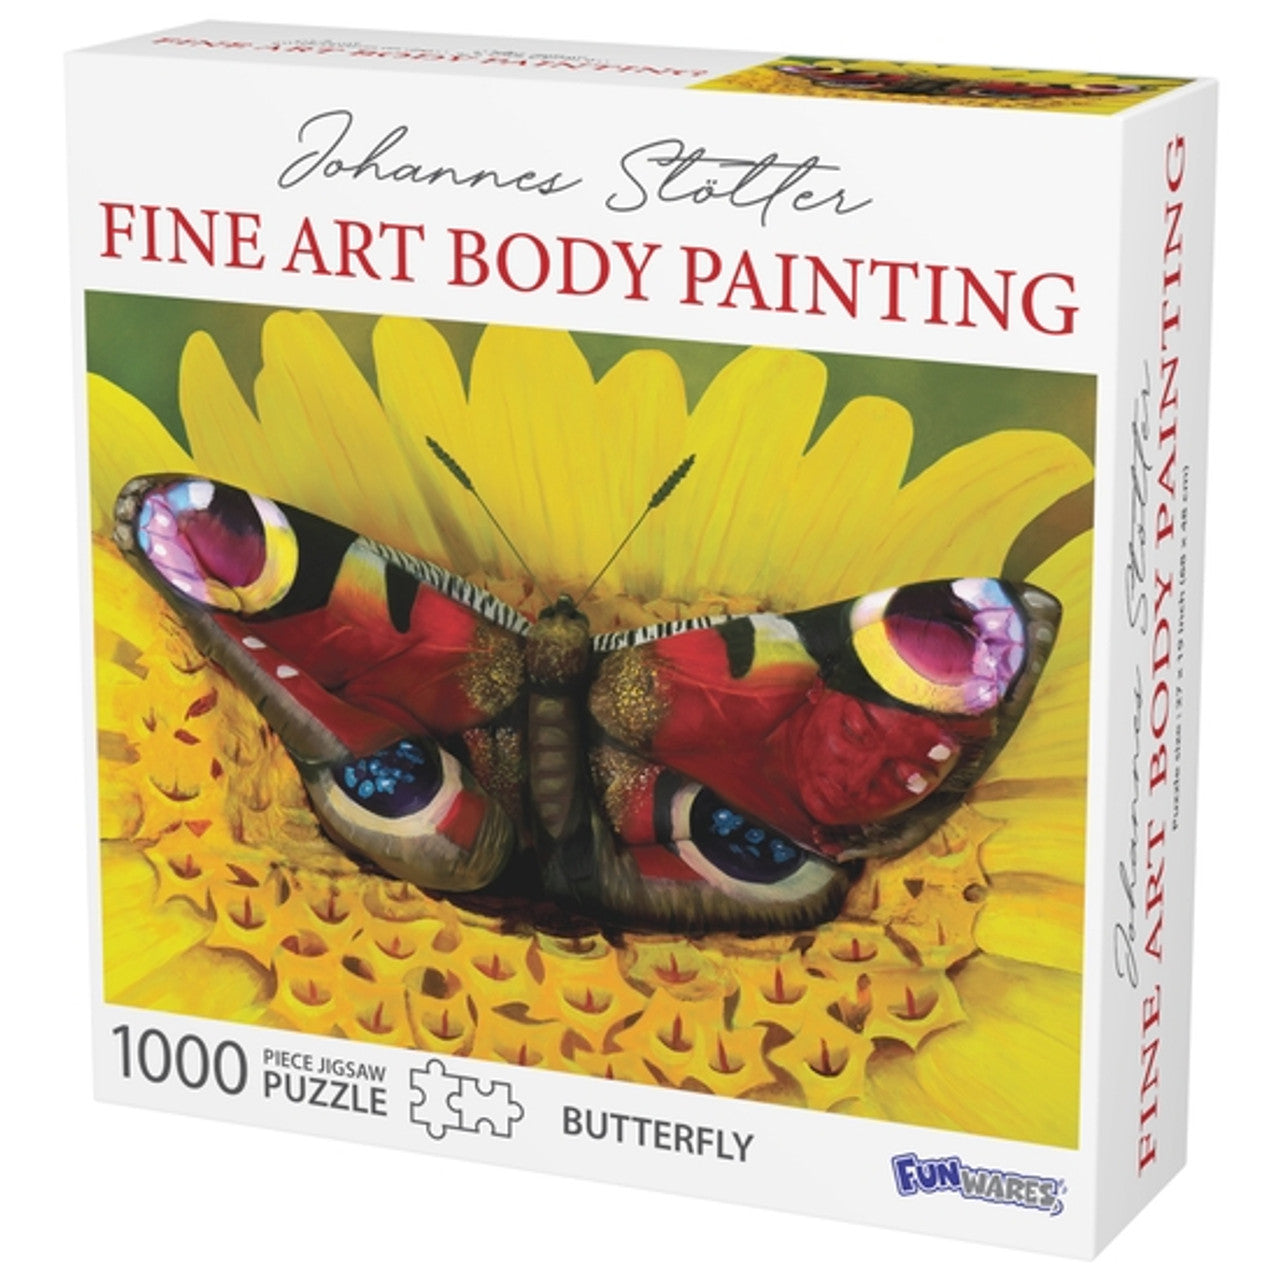 FINE ART BODY PAINTING BUTTERFLY PUZZLE